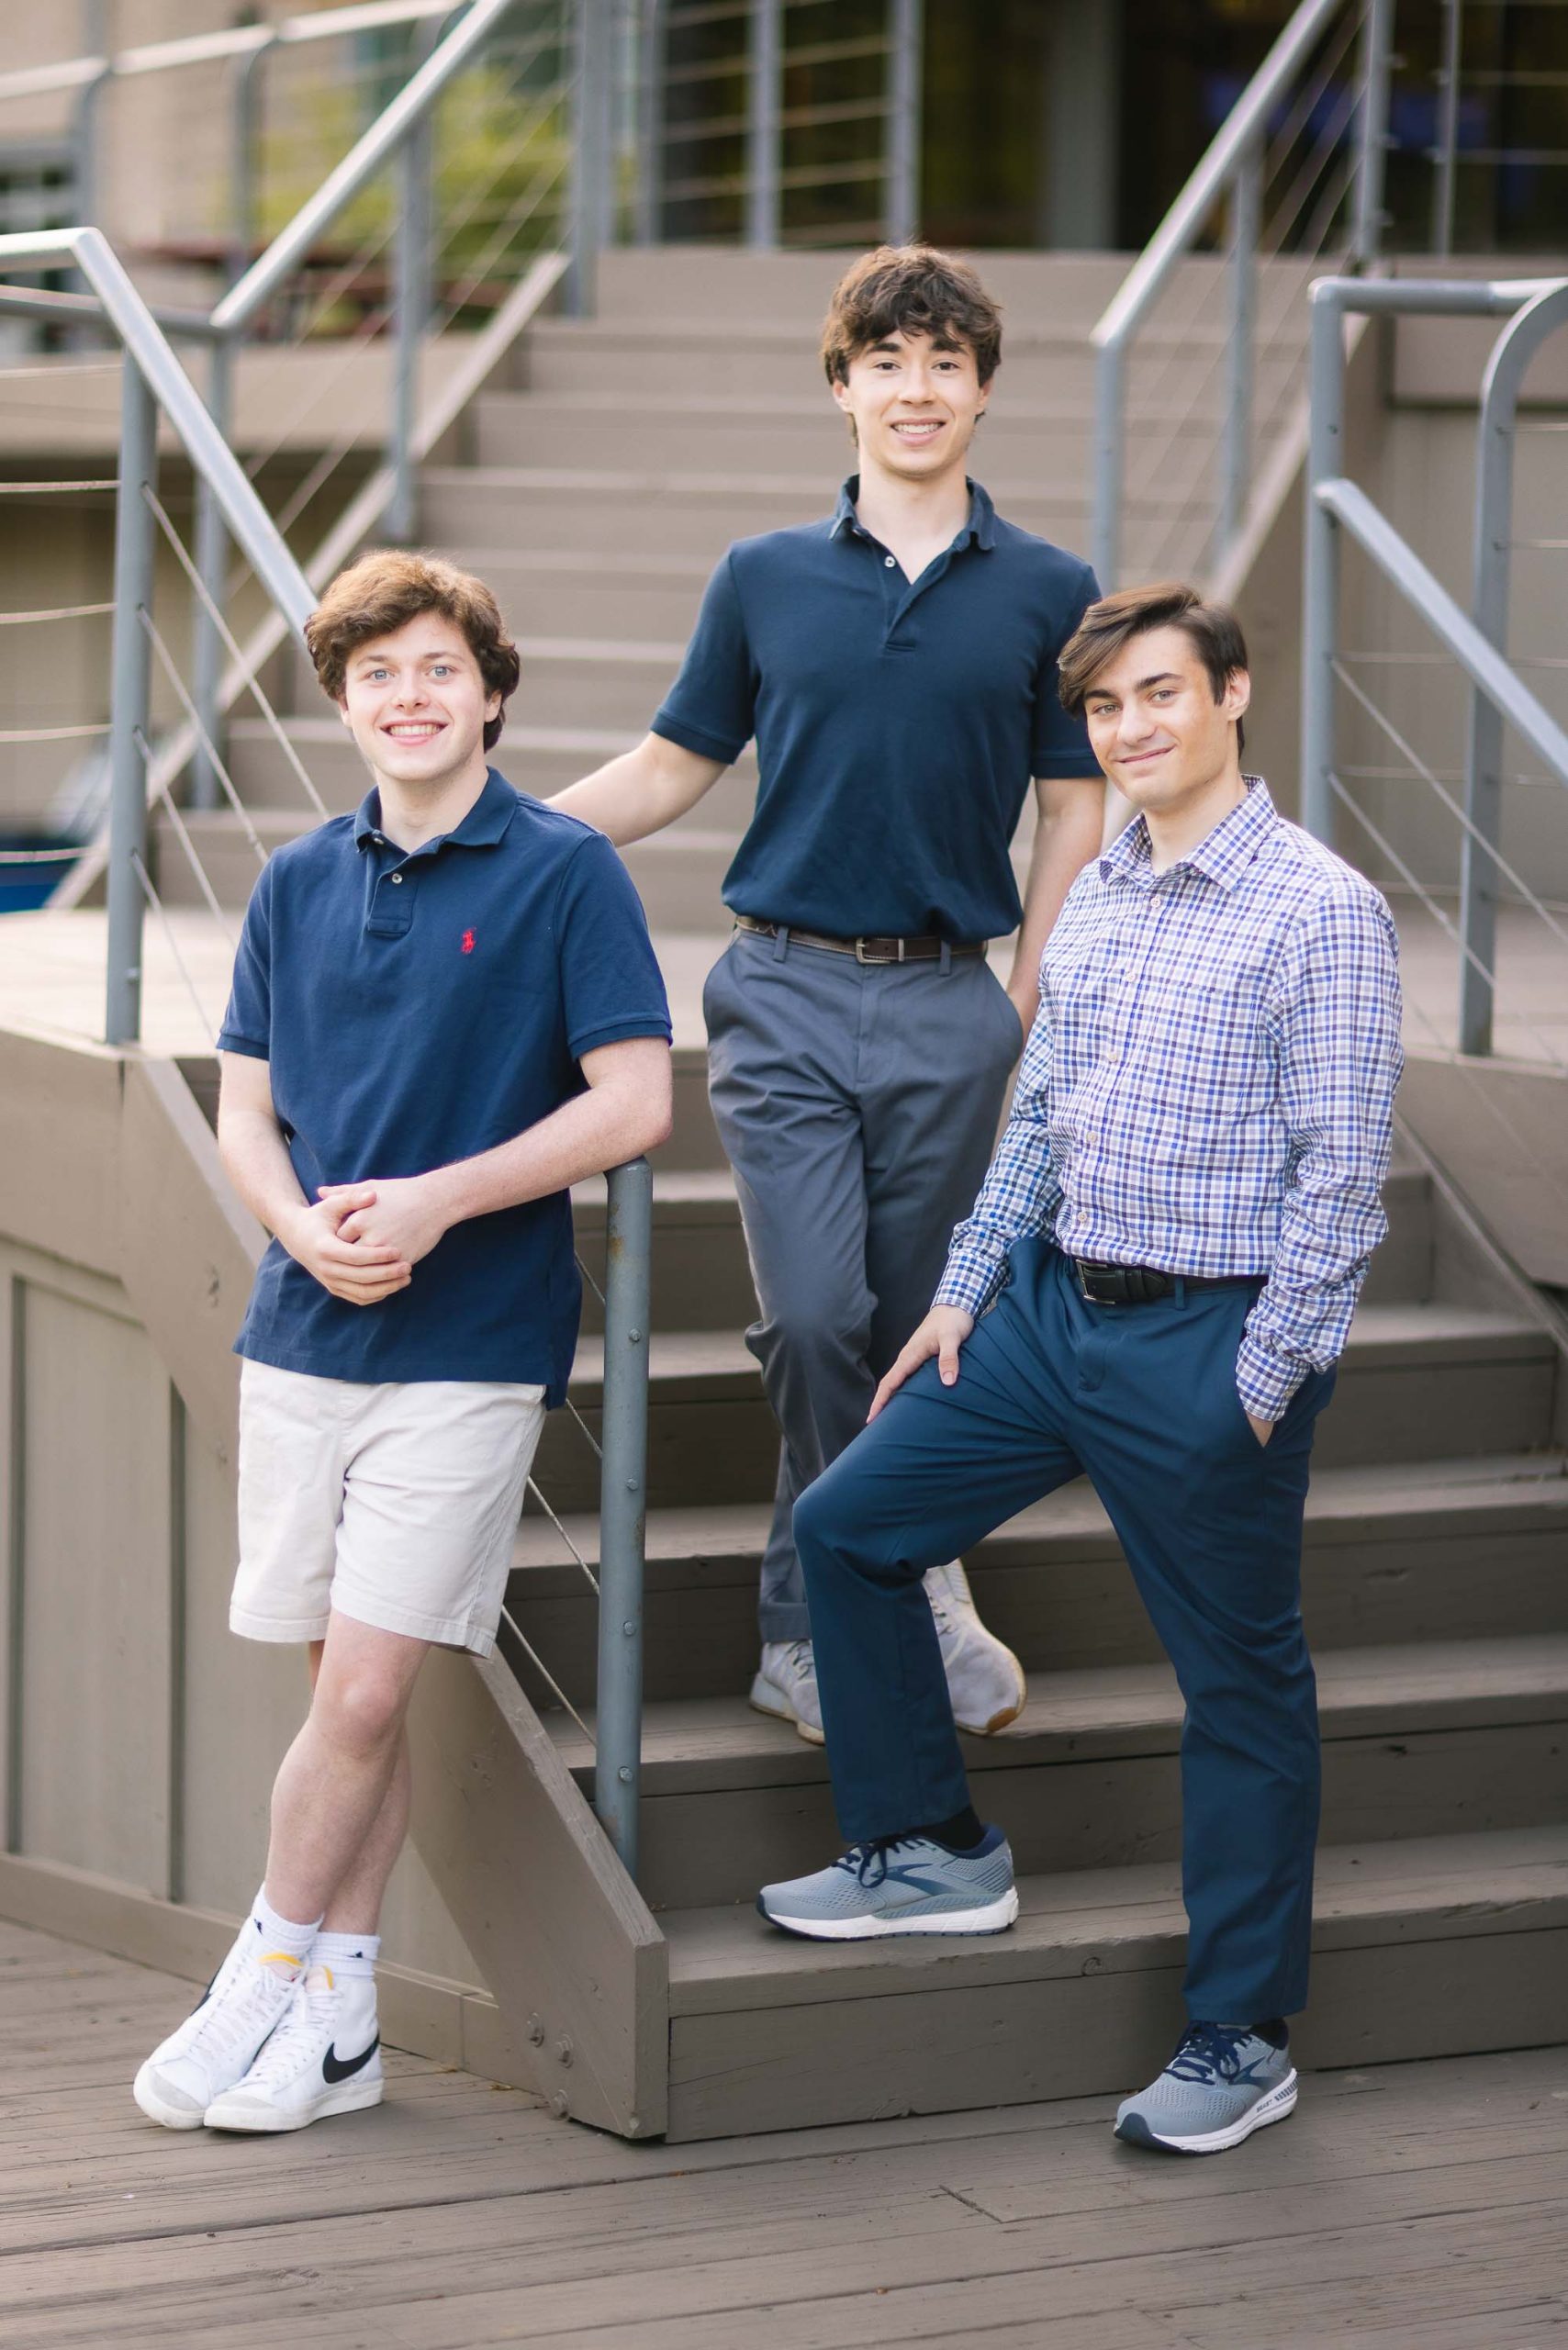 Three high school seniors posing on steps in front of a building.